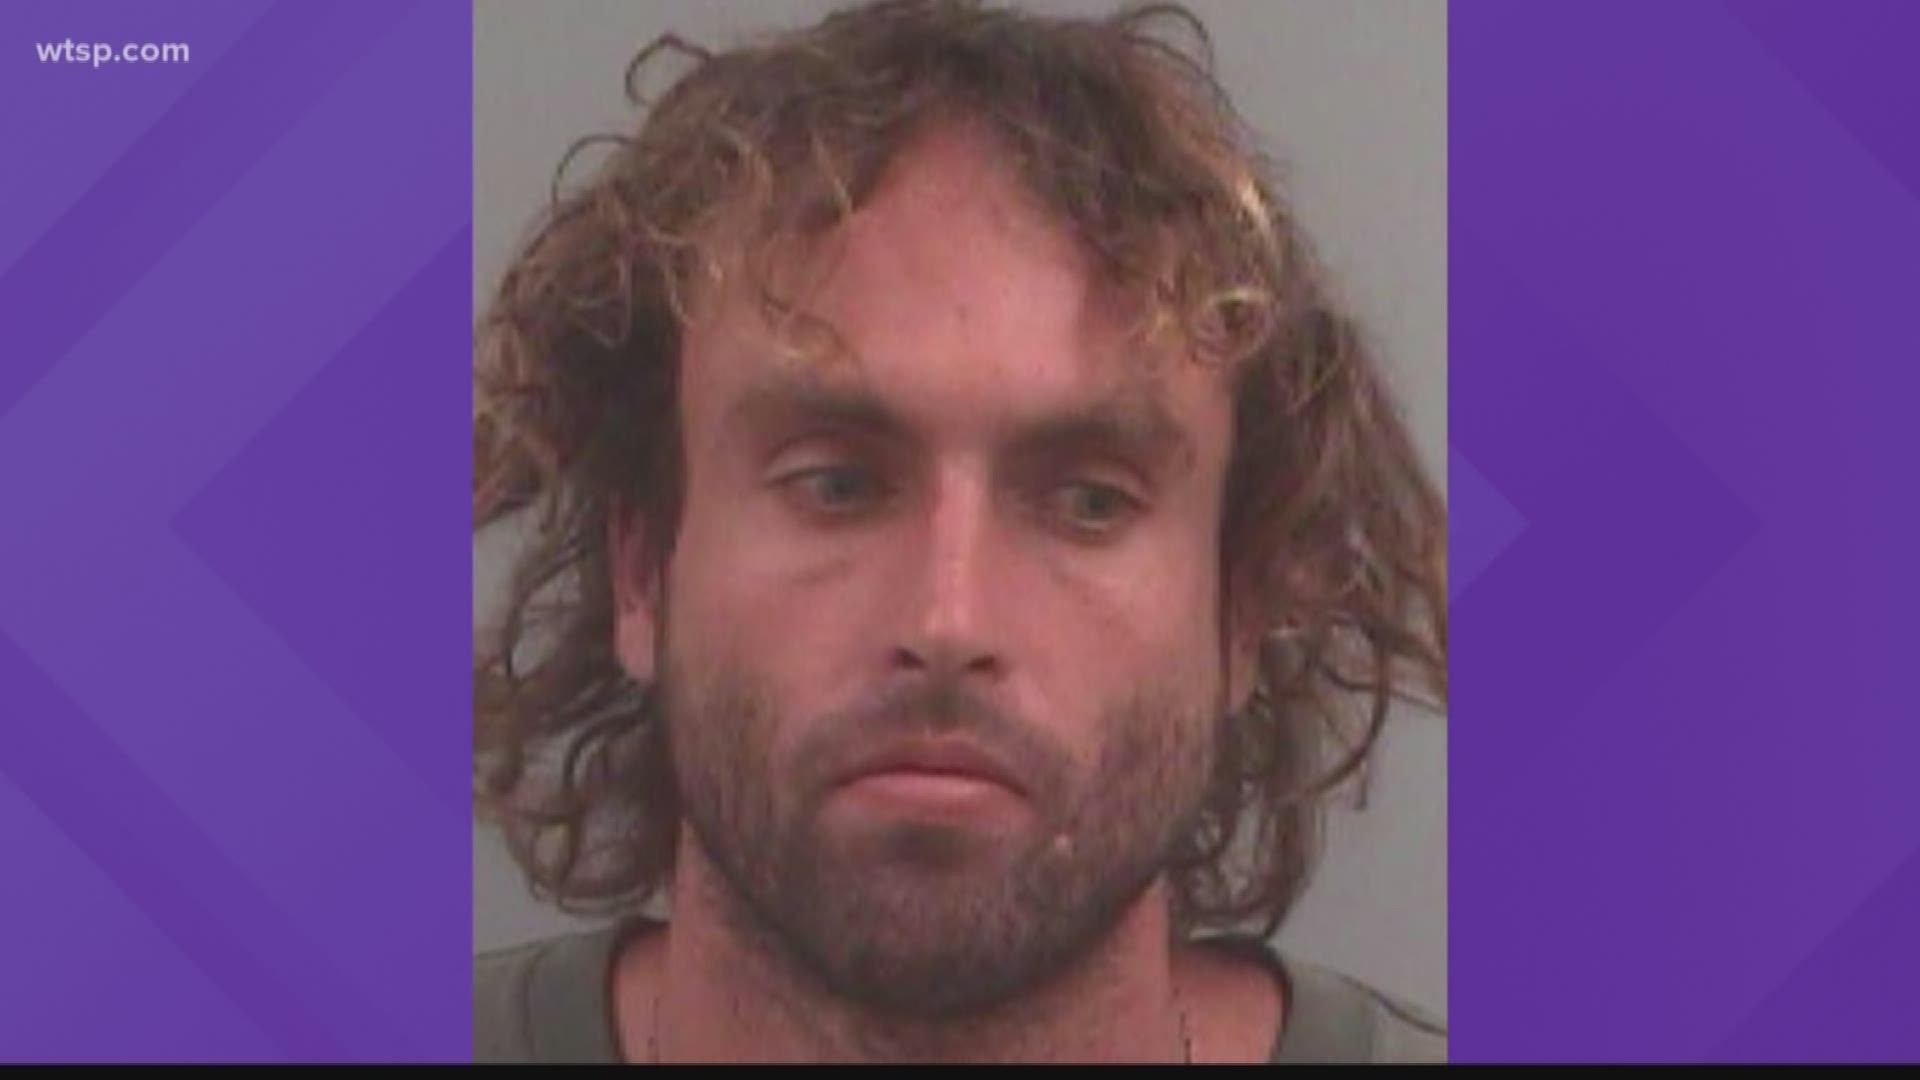 St. Petersburg police say a 32-year-old man was yelling anti-LGBTQ comments before repeatedly punching a victim who tried to stop him.

Police said Bryant Chipman was walking around downtown St. Petersburg during the annual St. Pete Pride festival and "making aggressive anti-LGBTQ comments." When the victim tried to calm Chipman down, officers say Chipman attacked the victim.